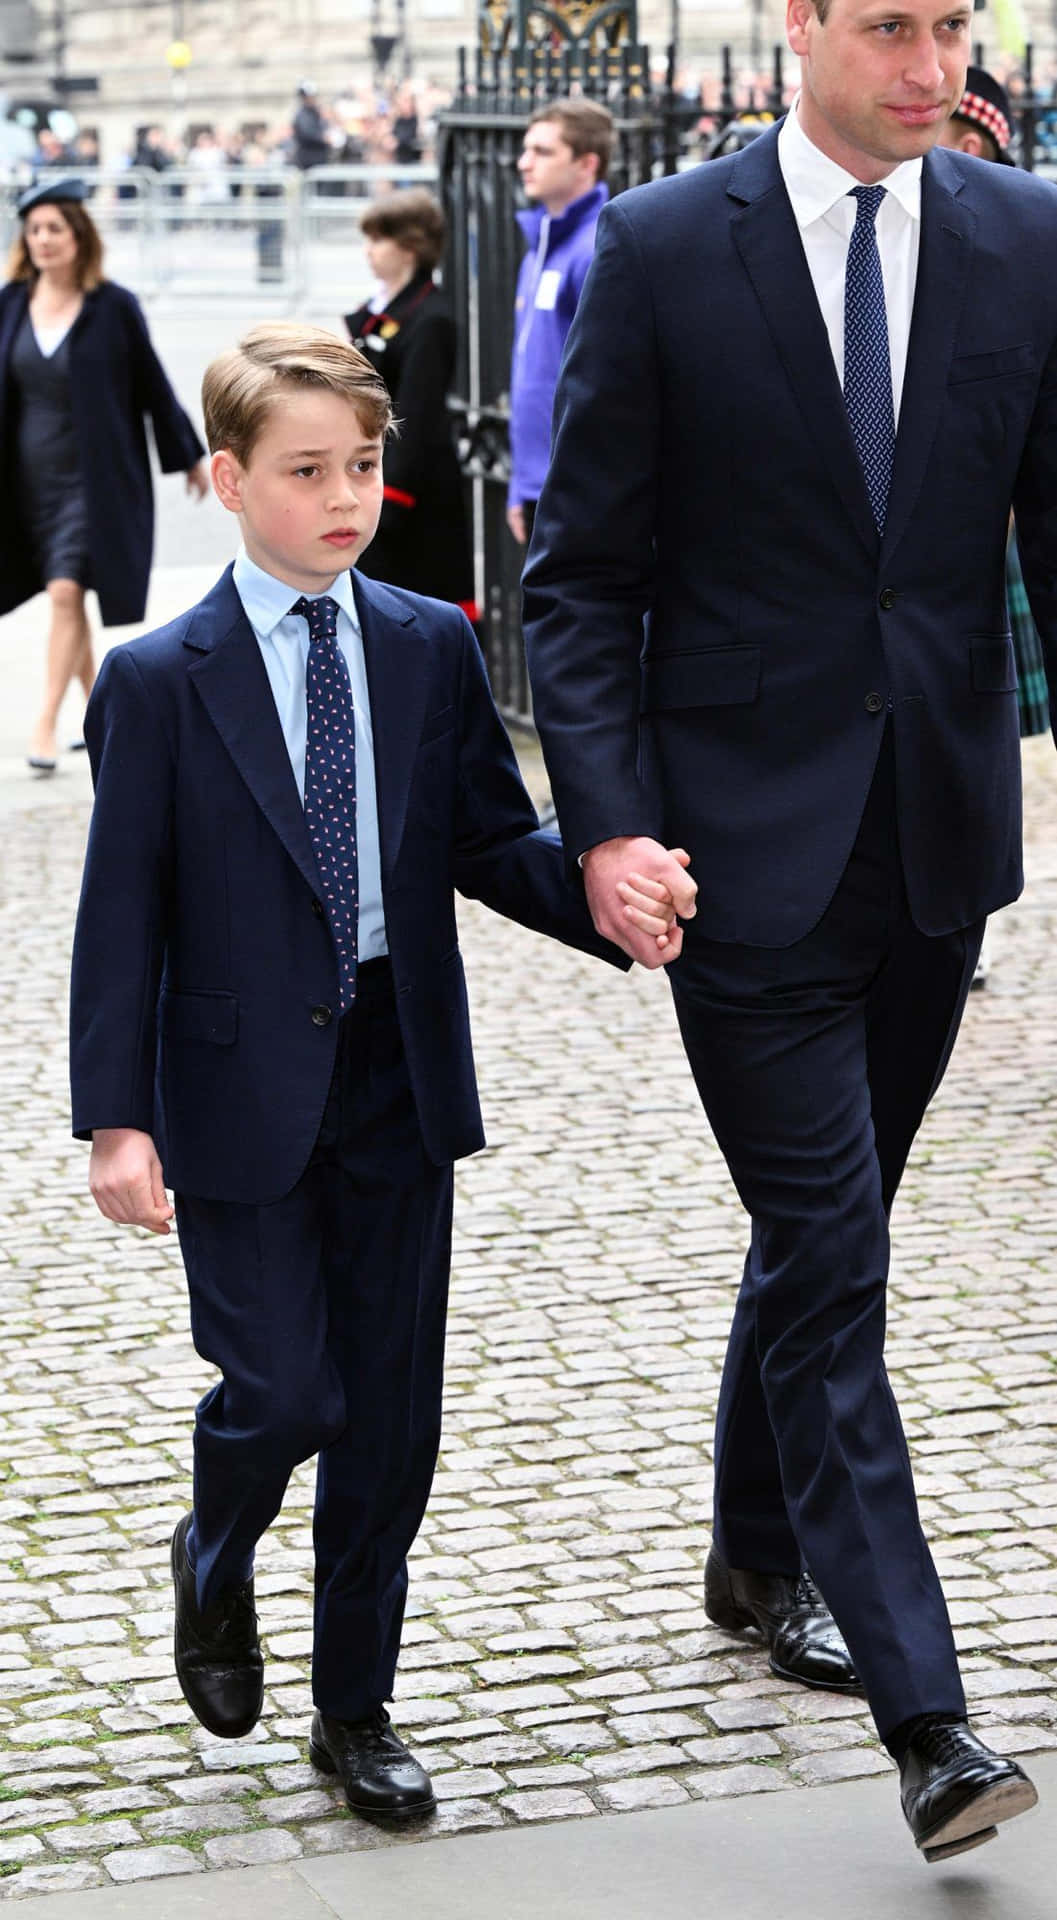 Prince William And Prince William Walk Down The Street